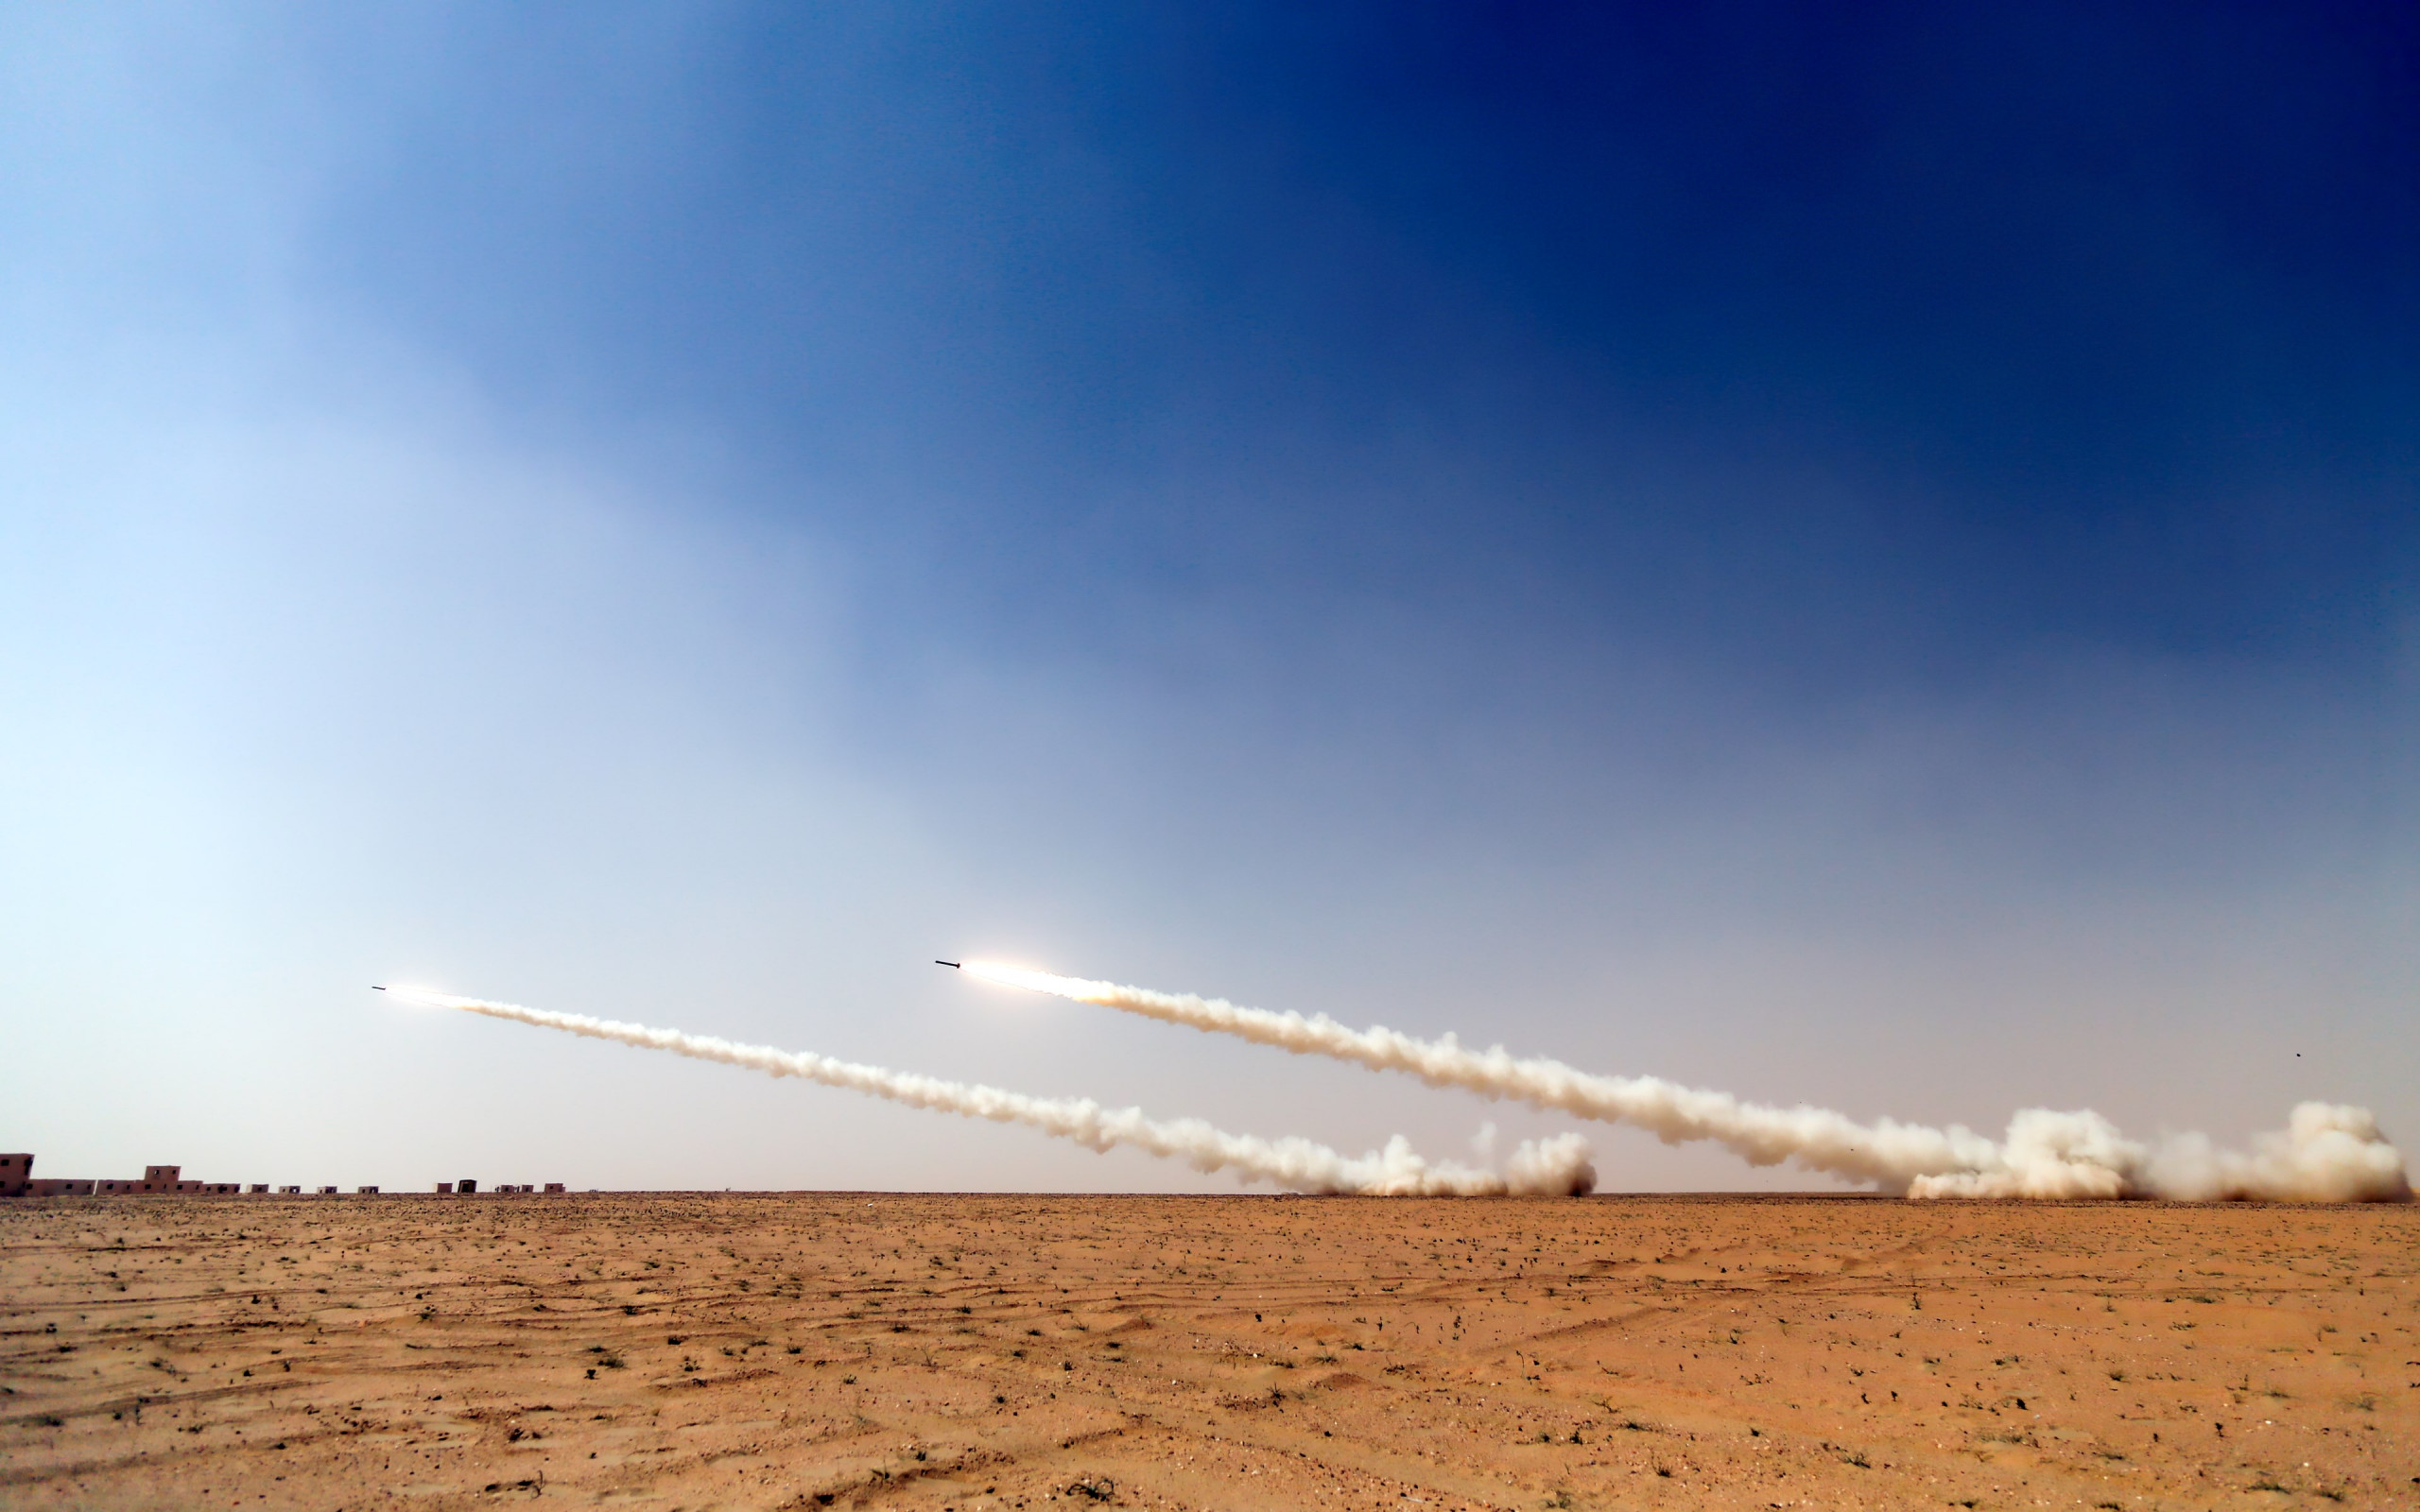 Military rockets on the sky wallpaper 2560x1600